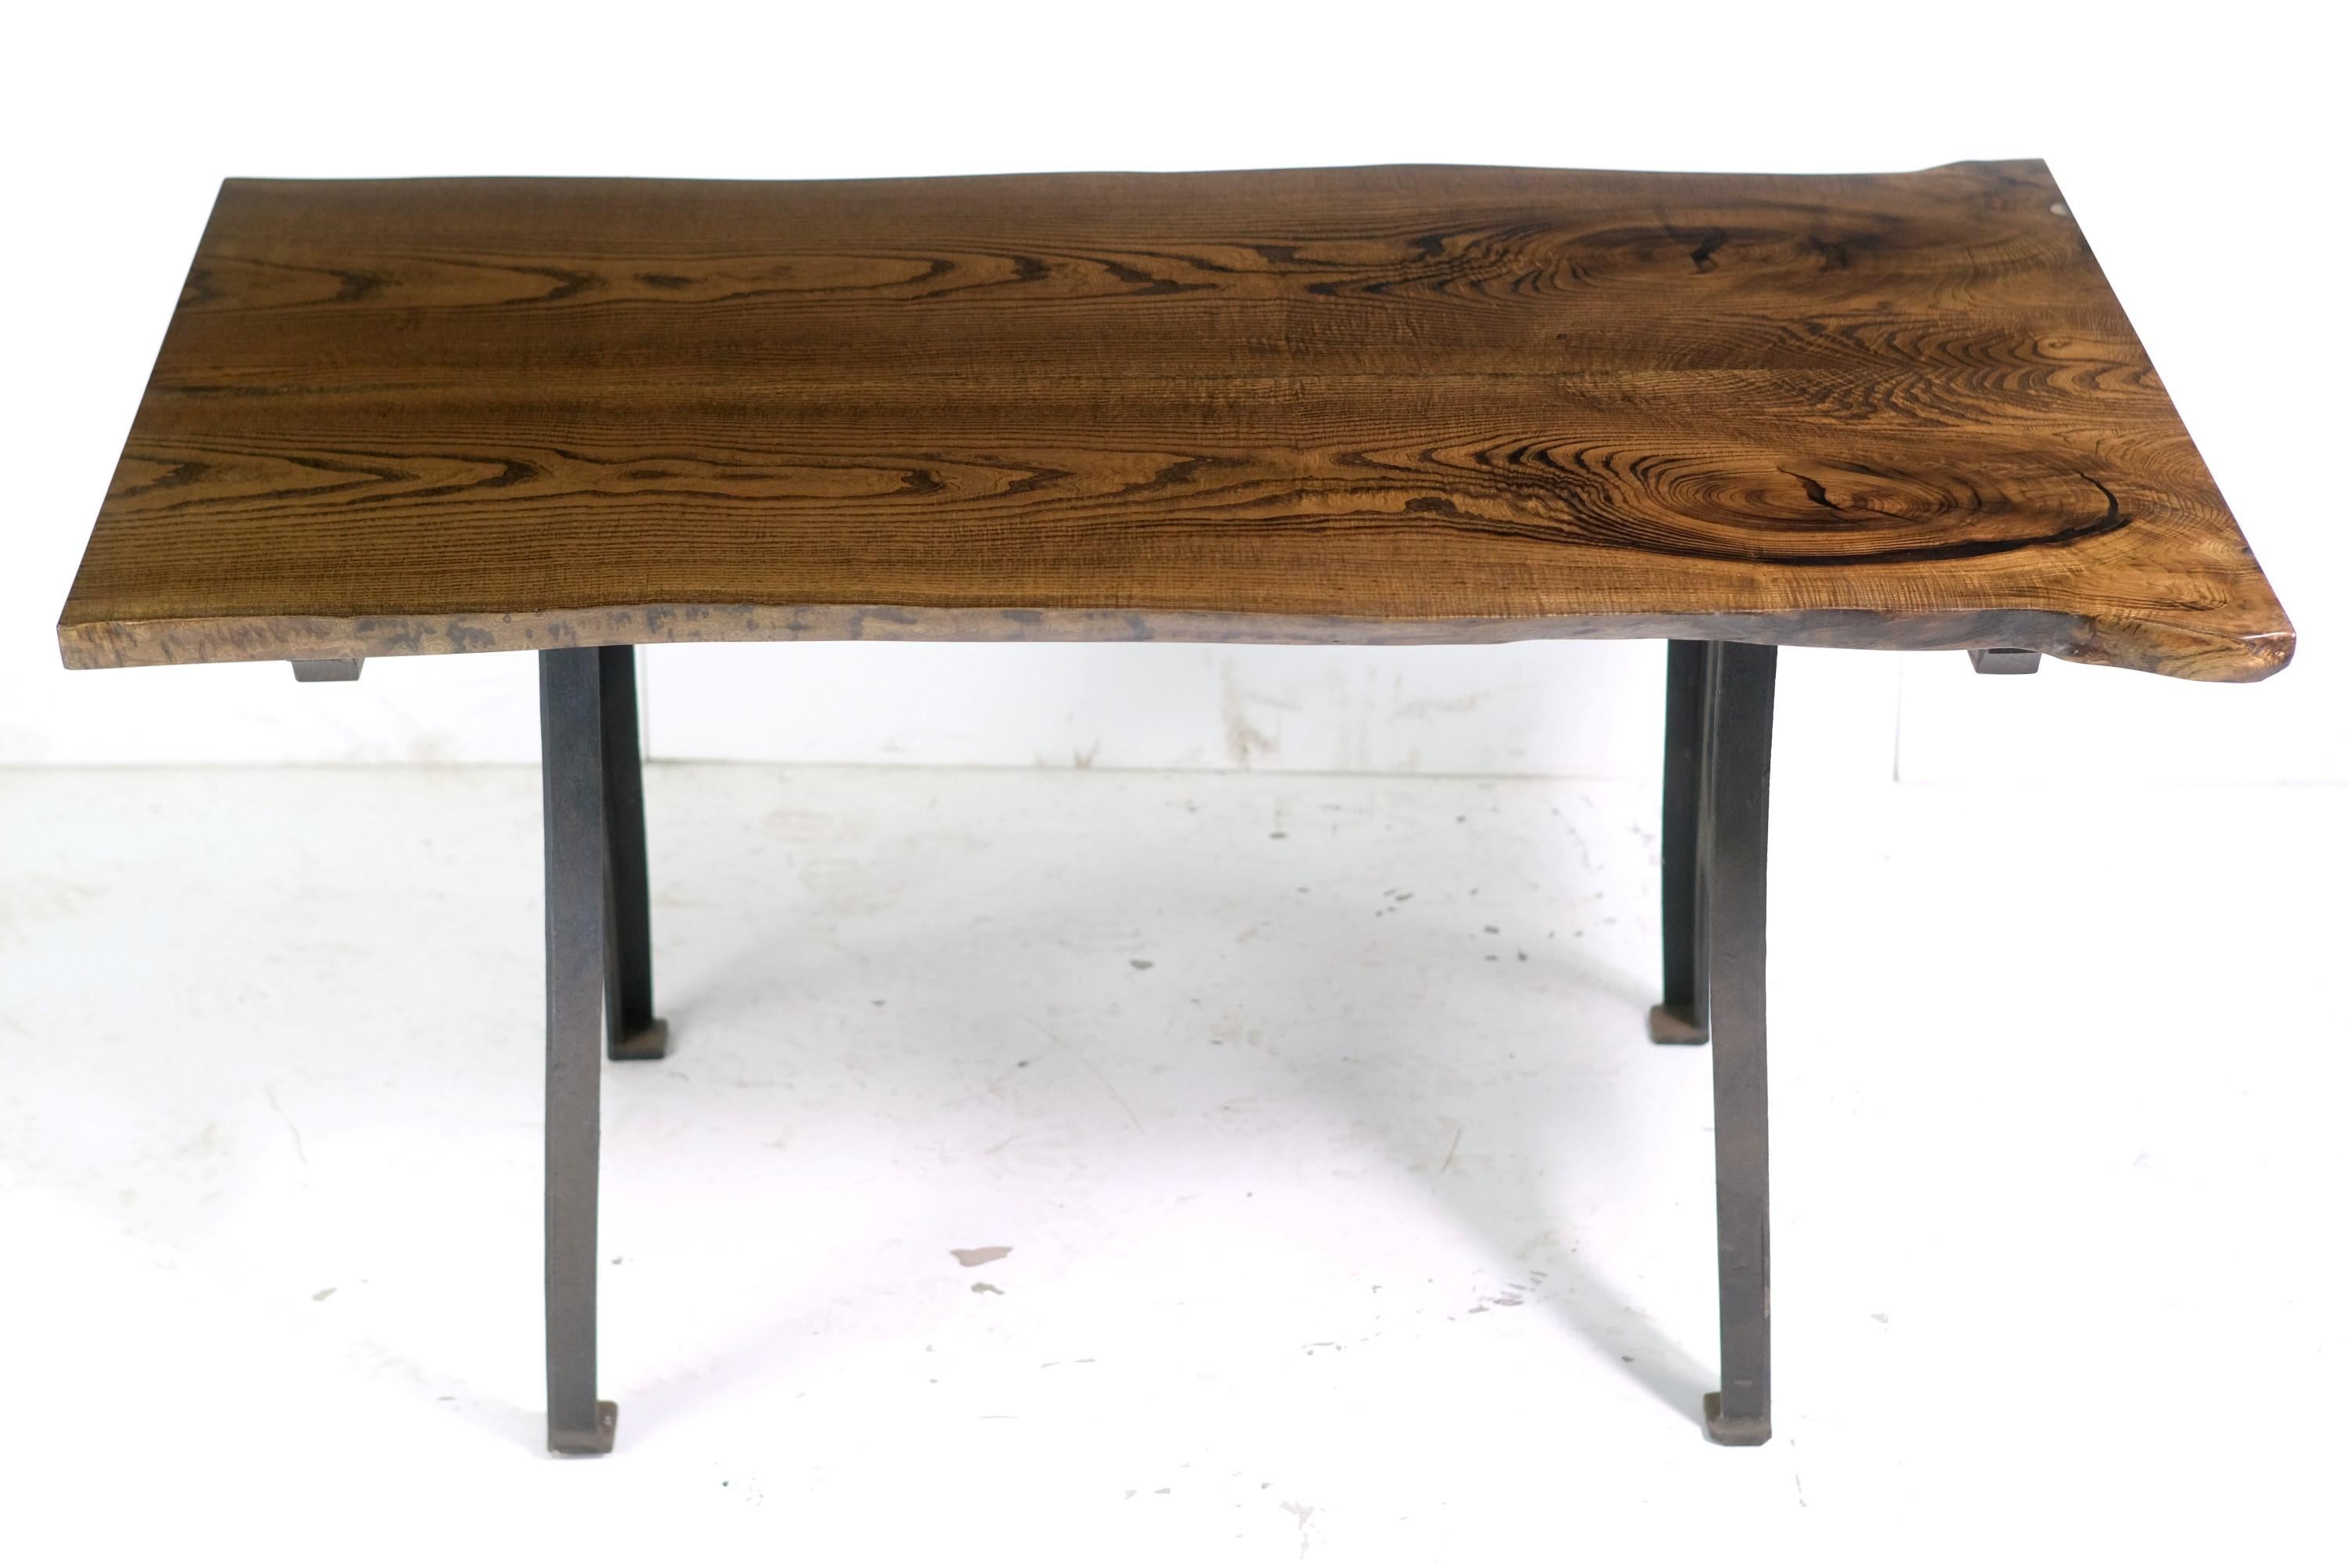 This live edge table features a two slab solid chestnut top with a dark walnut stain and a satin conversion varnish finish paired with cast iron New York legs. This table is ready to ship. Please note, this item is located in our Los Angeles